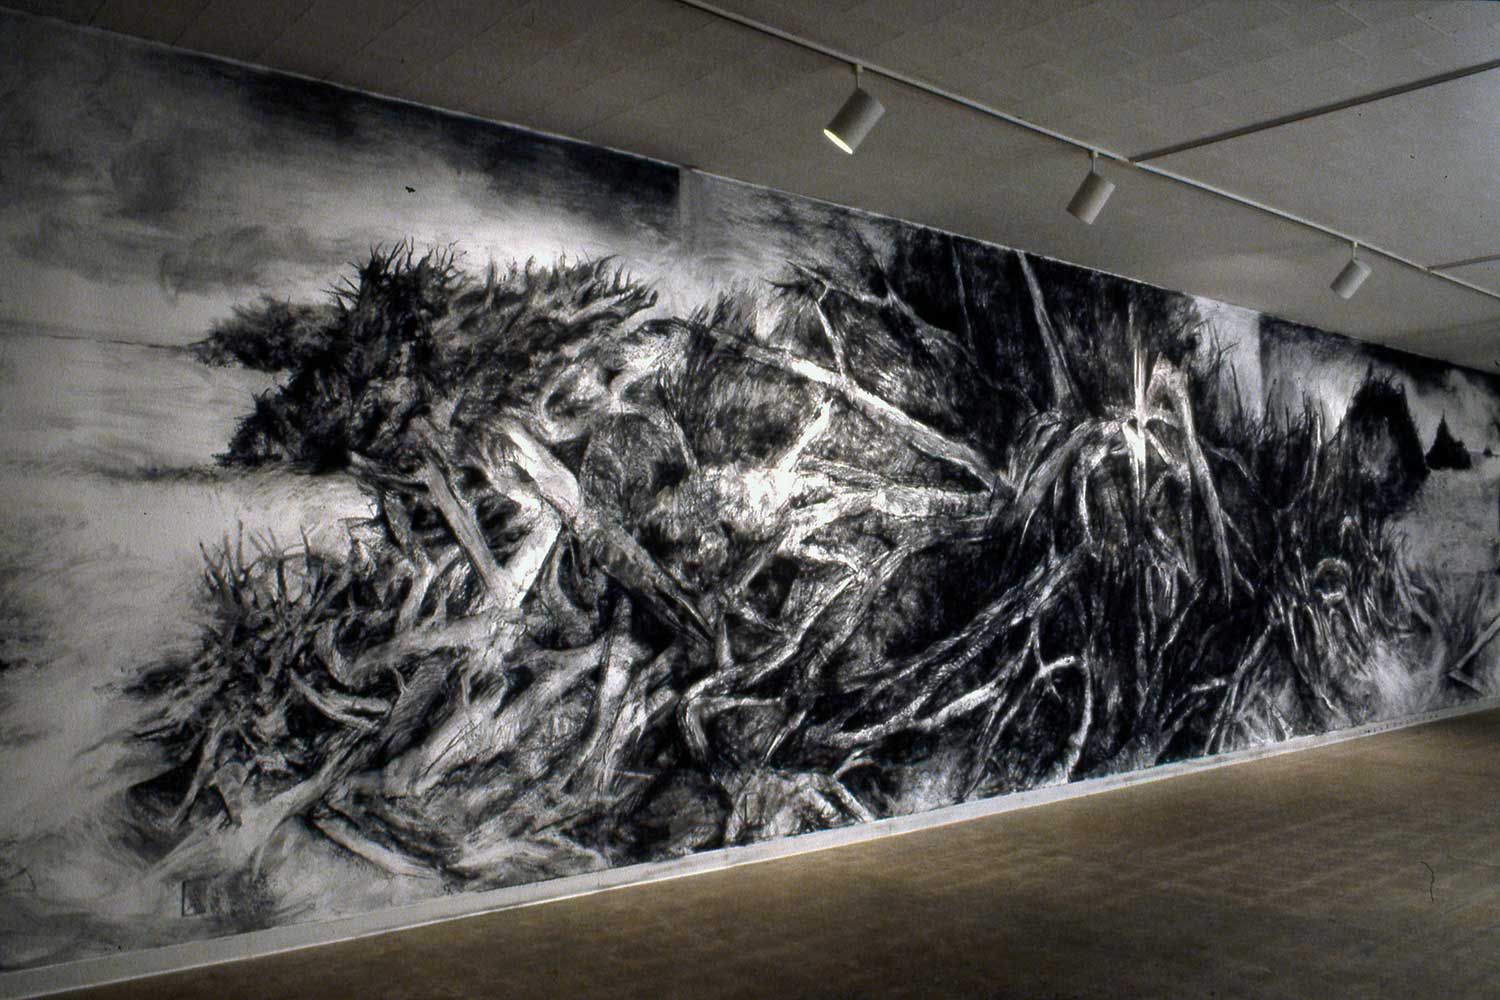 Charcoal on gallery wall 12’ x 52’, Gallery 25, Fresno CA, 2004